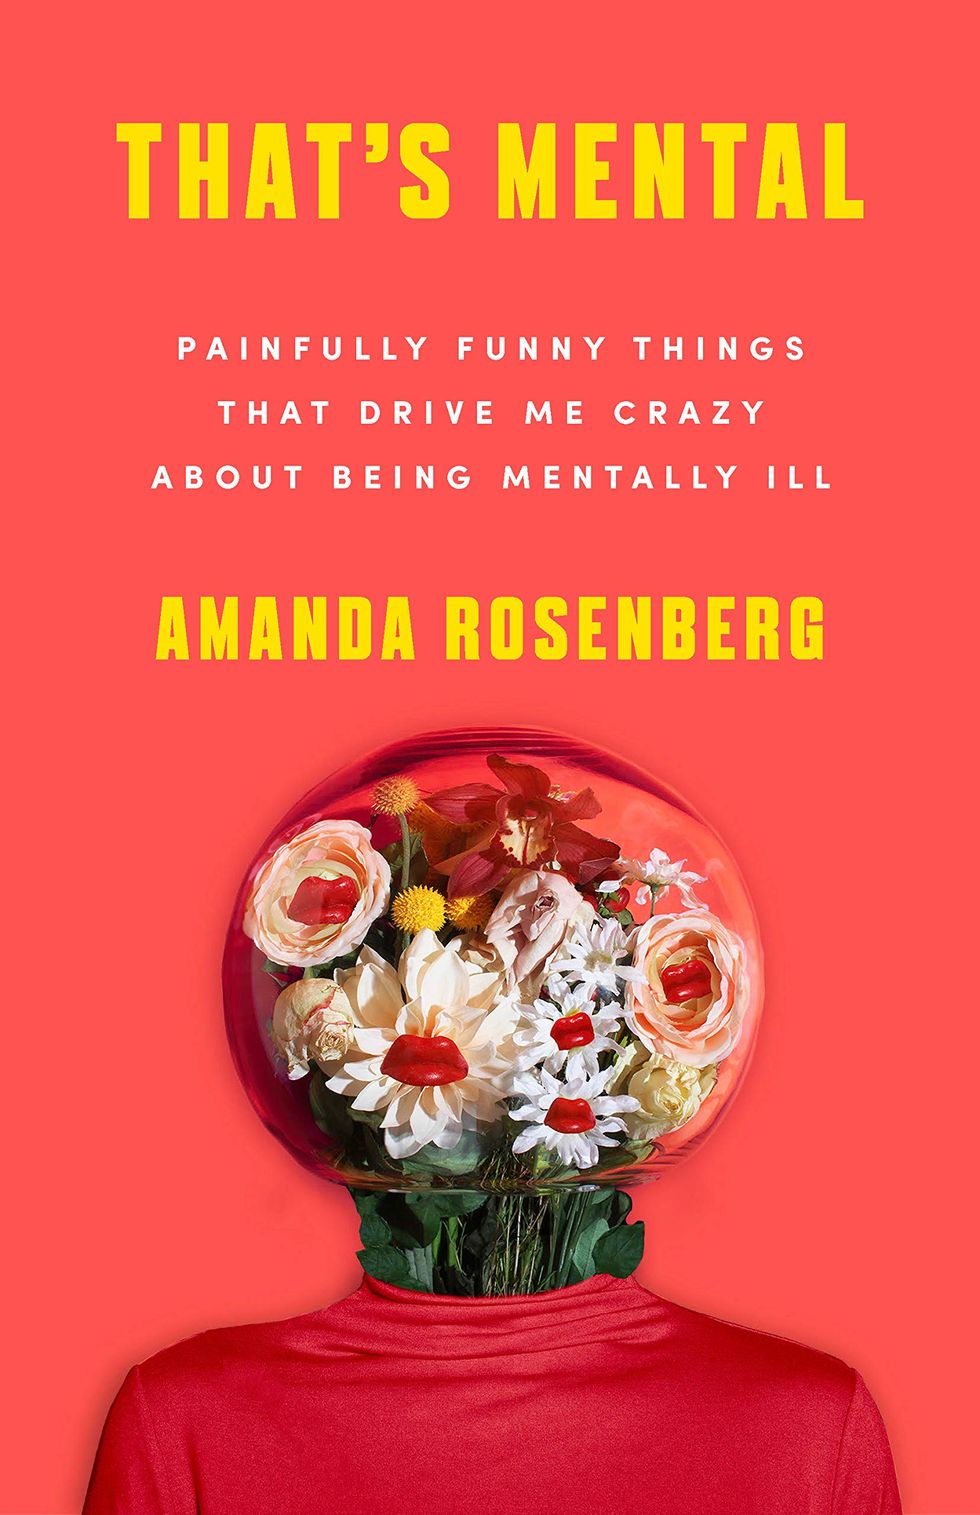 That's Mental: Painfully Funny Things That Drive Me Crazy About Being Mentally Ill by Amanda Rosenberg 